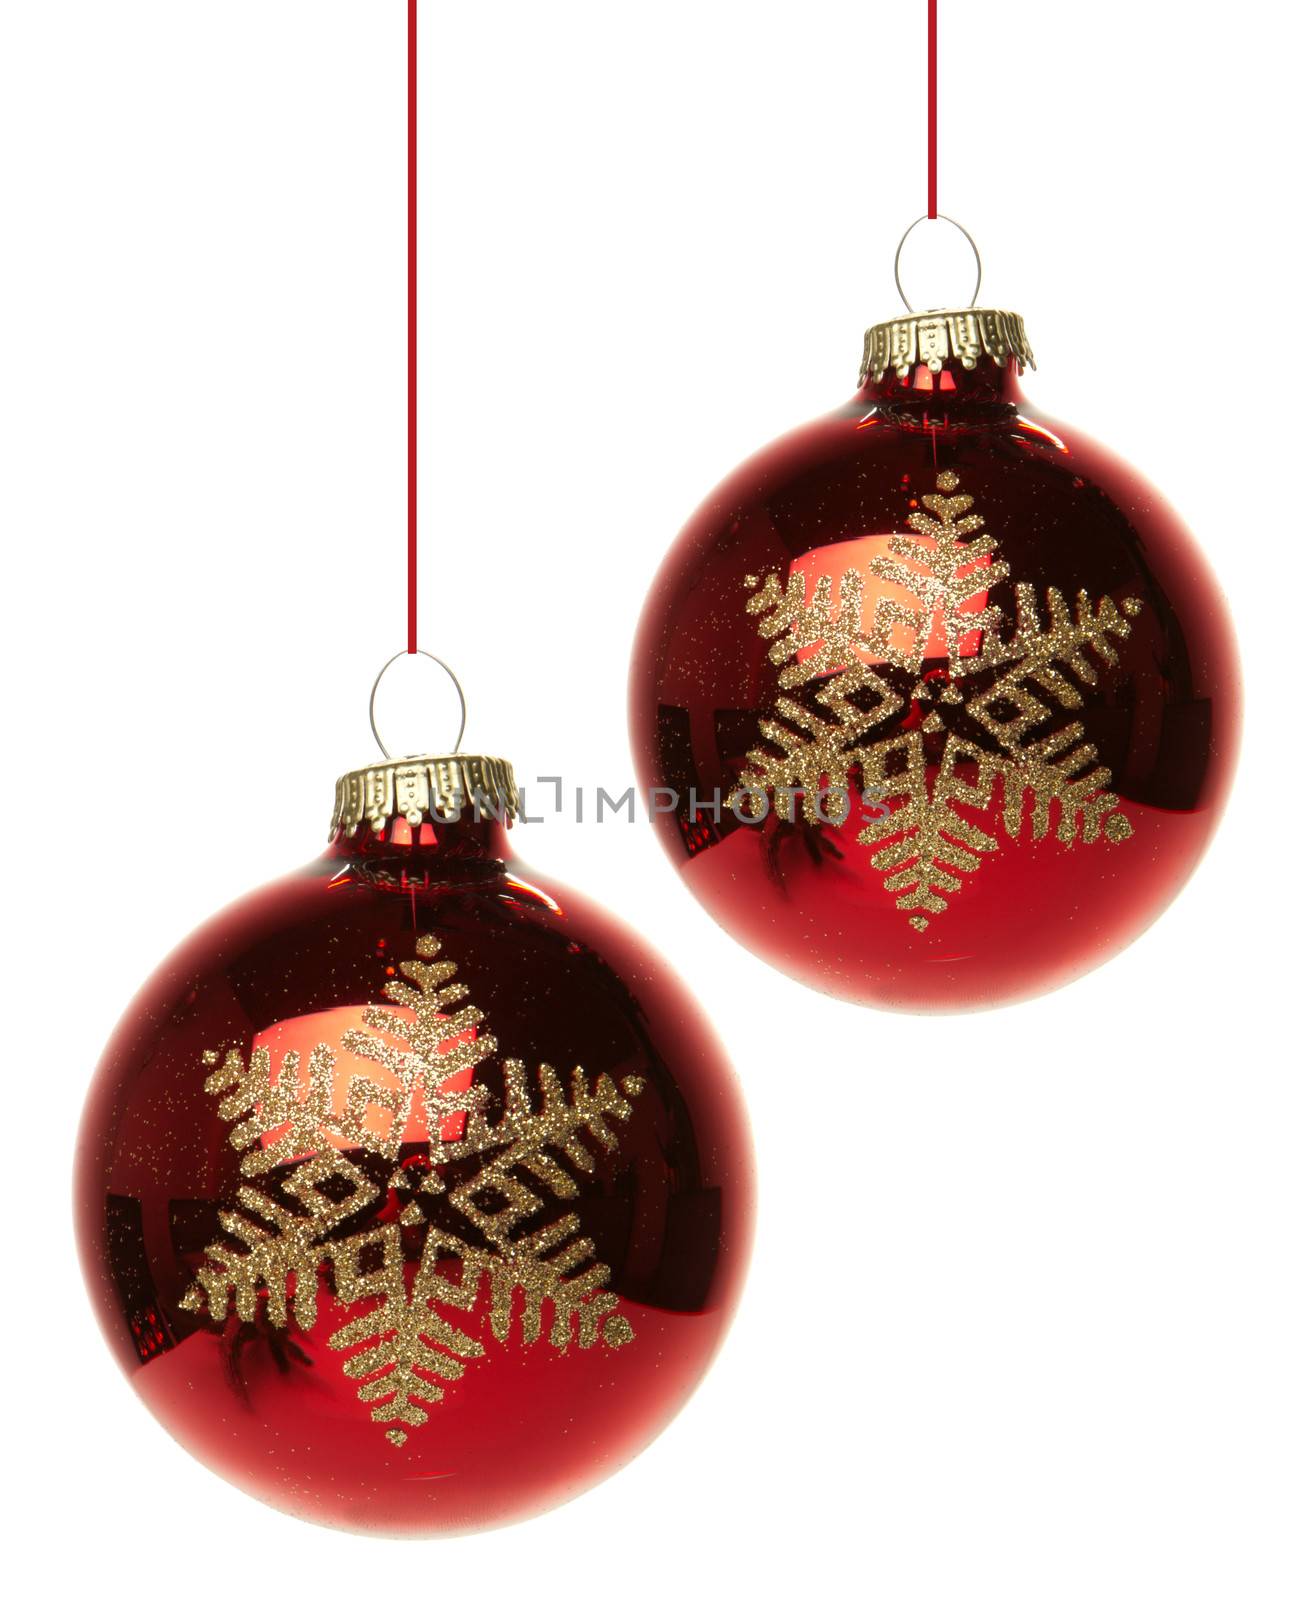 christmas ornament red by Tomjac1980